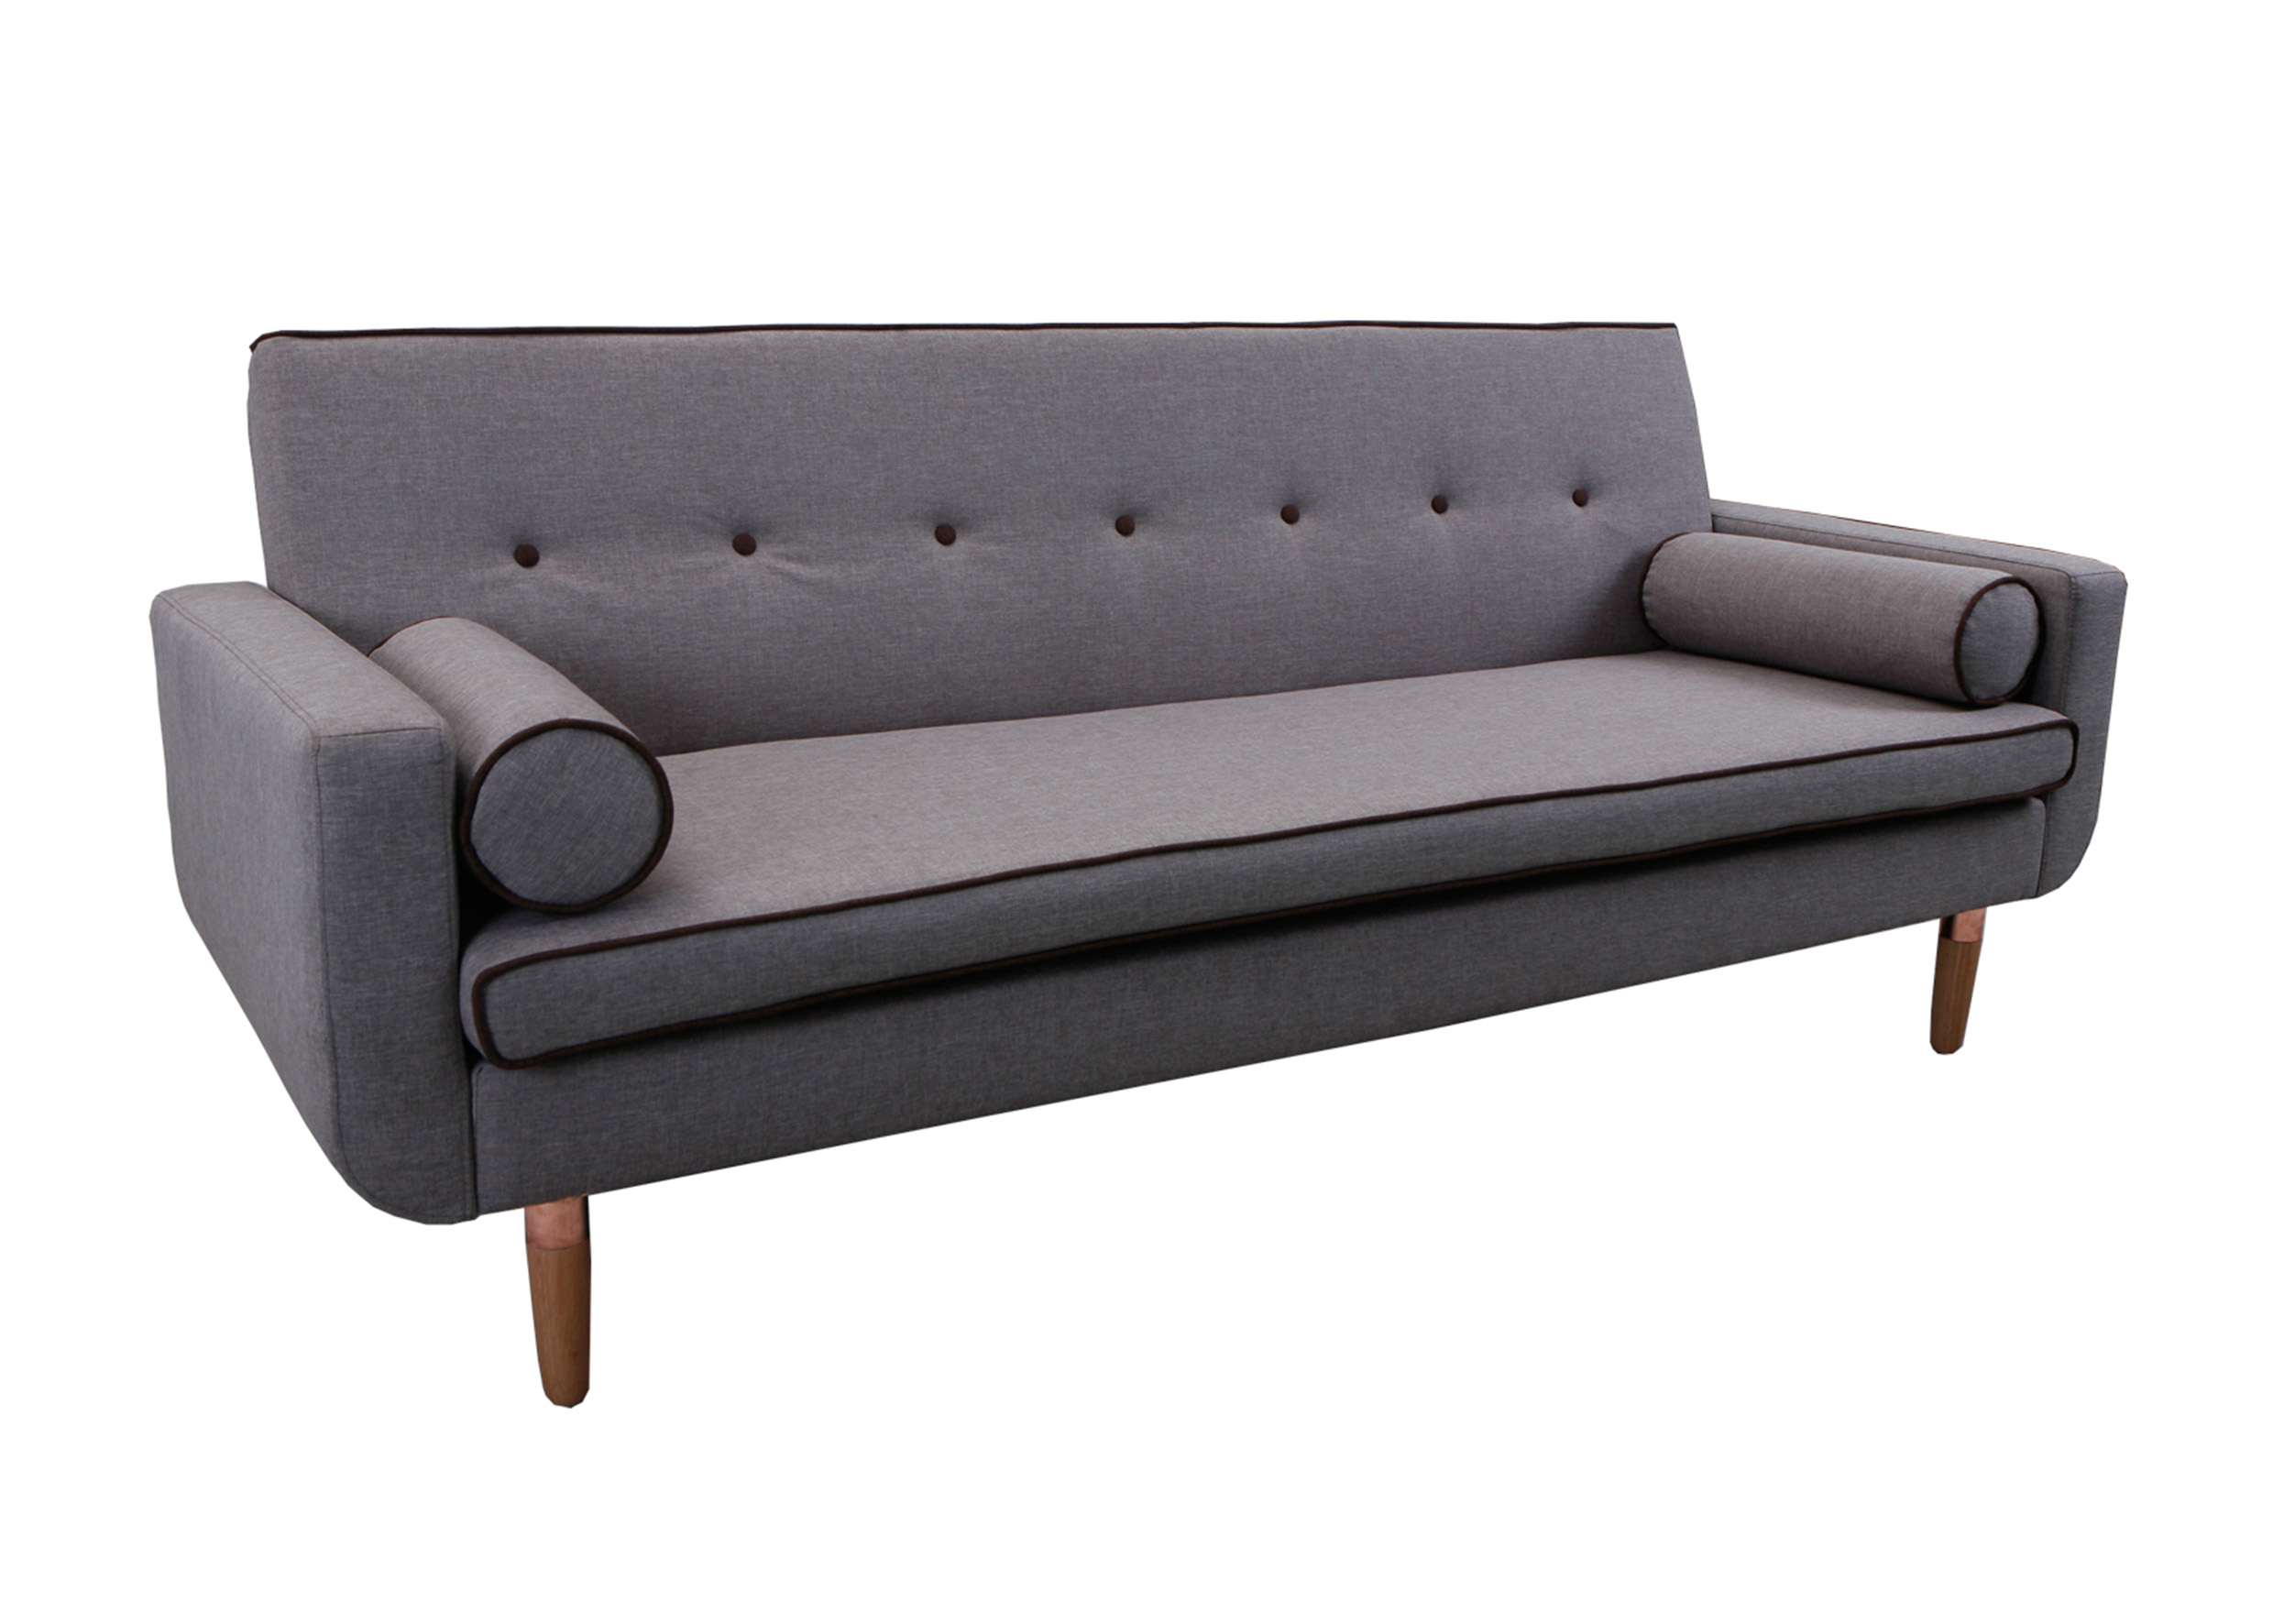 themia-sofabed-model-10-sofa-cho-gia-dinh